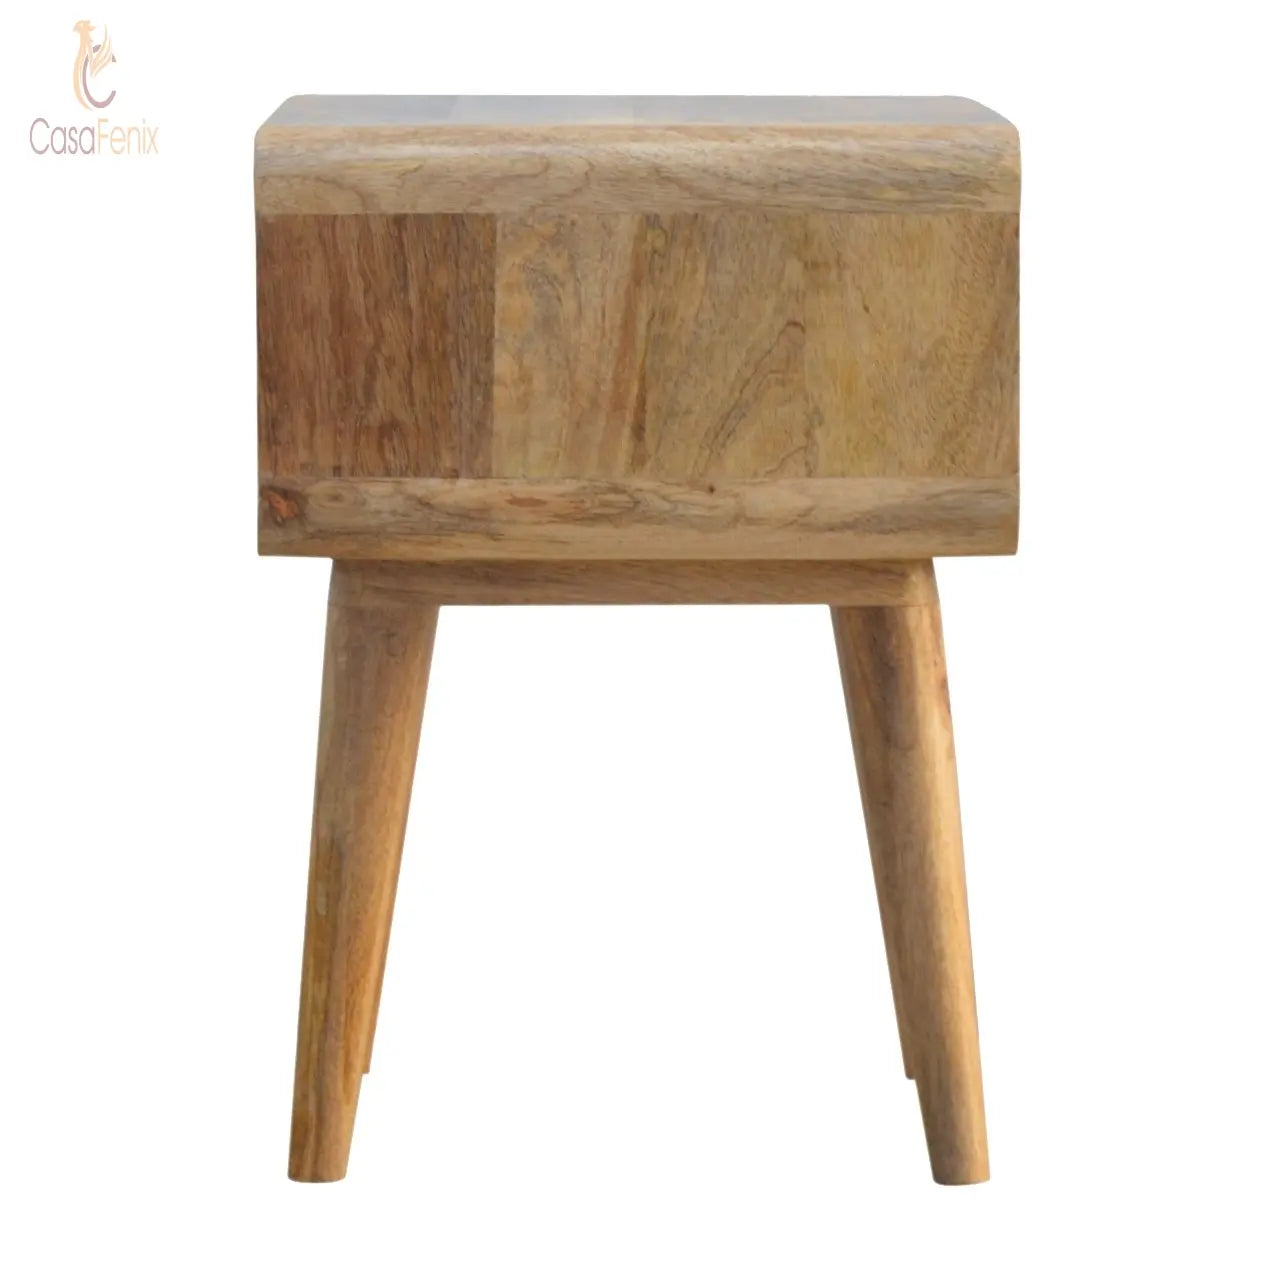 Curved Open Bedside Solid Mango Wood With Oak-Ish Finish - CasaFenix